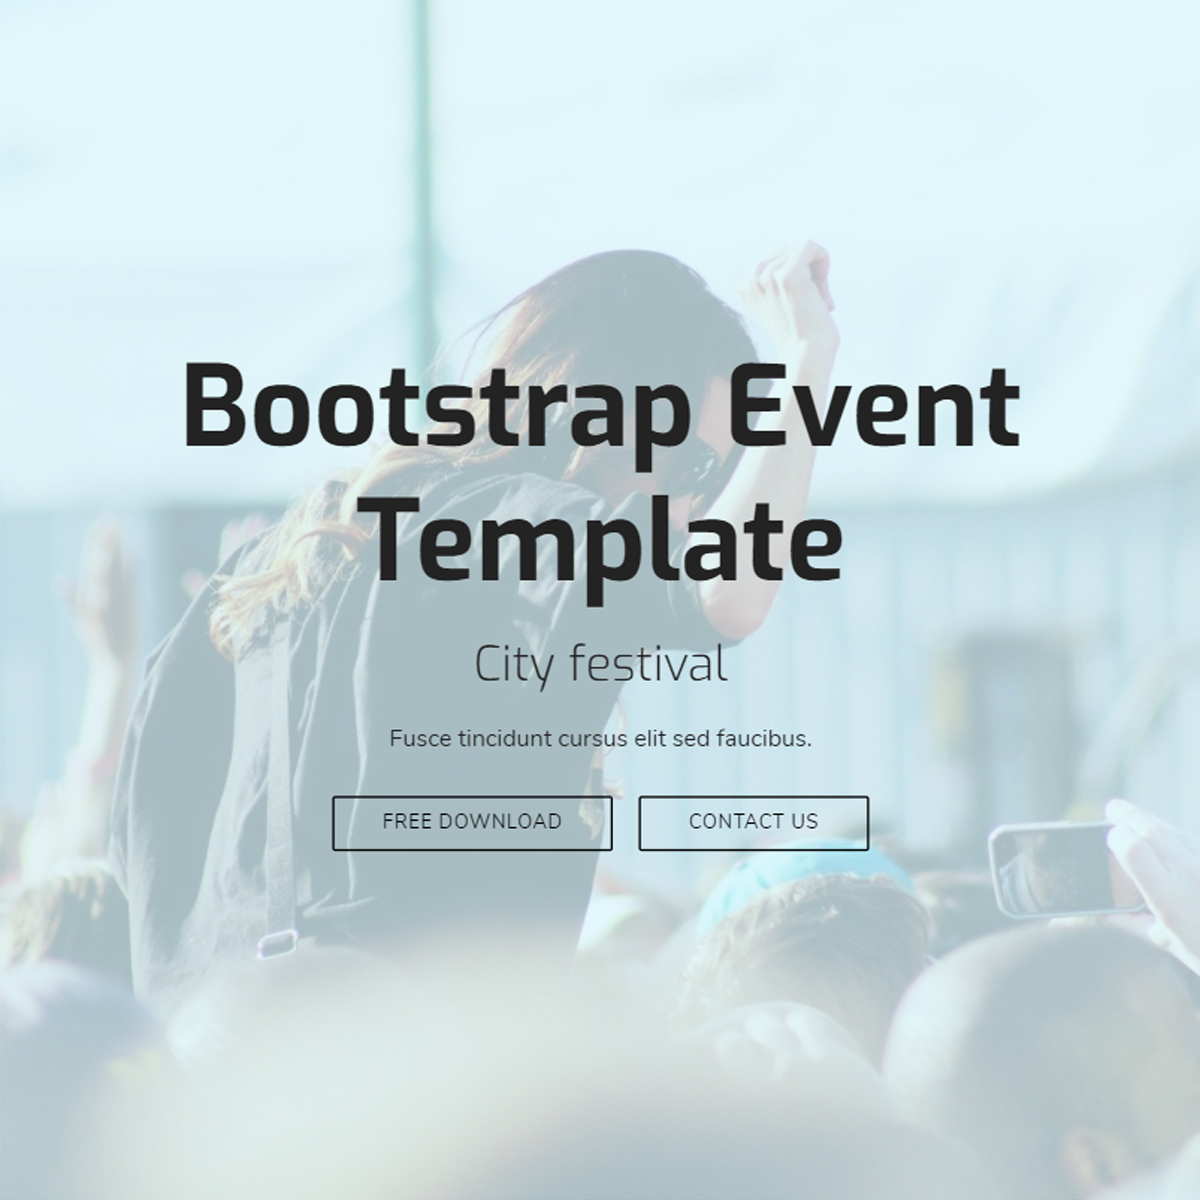 HTML5 Bootstrap Event Templates